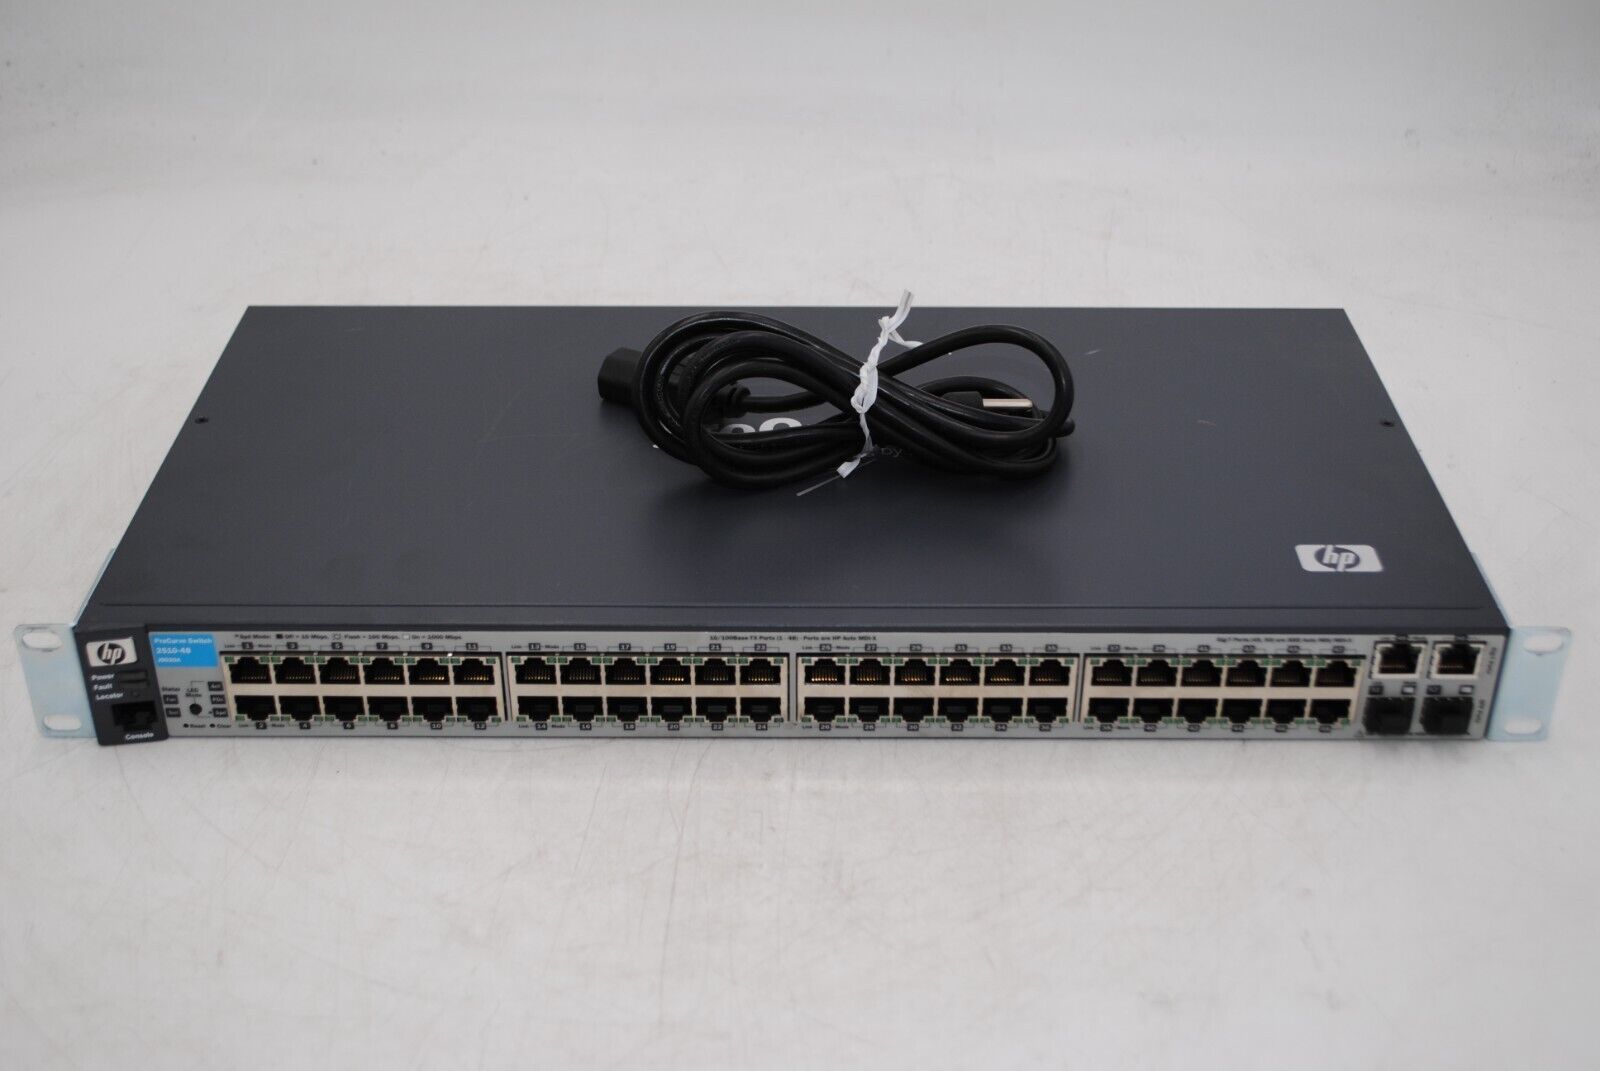 HP Networking ProCurve 2510-48 Managed Ethernet Switch J9020A w/ Rack Ears - $42.03